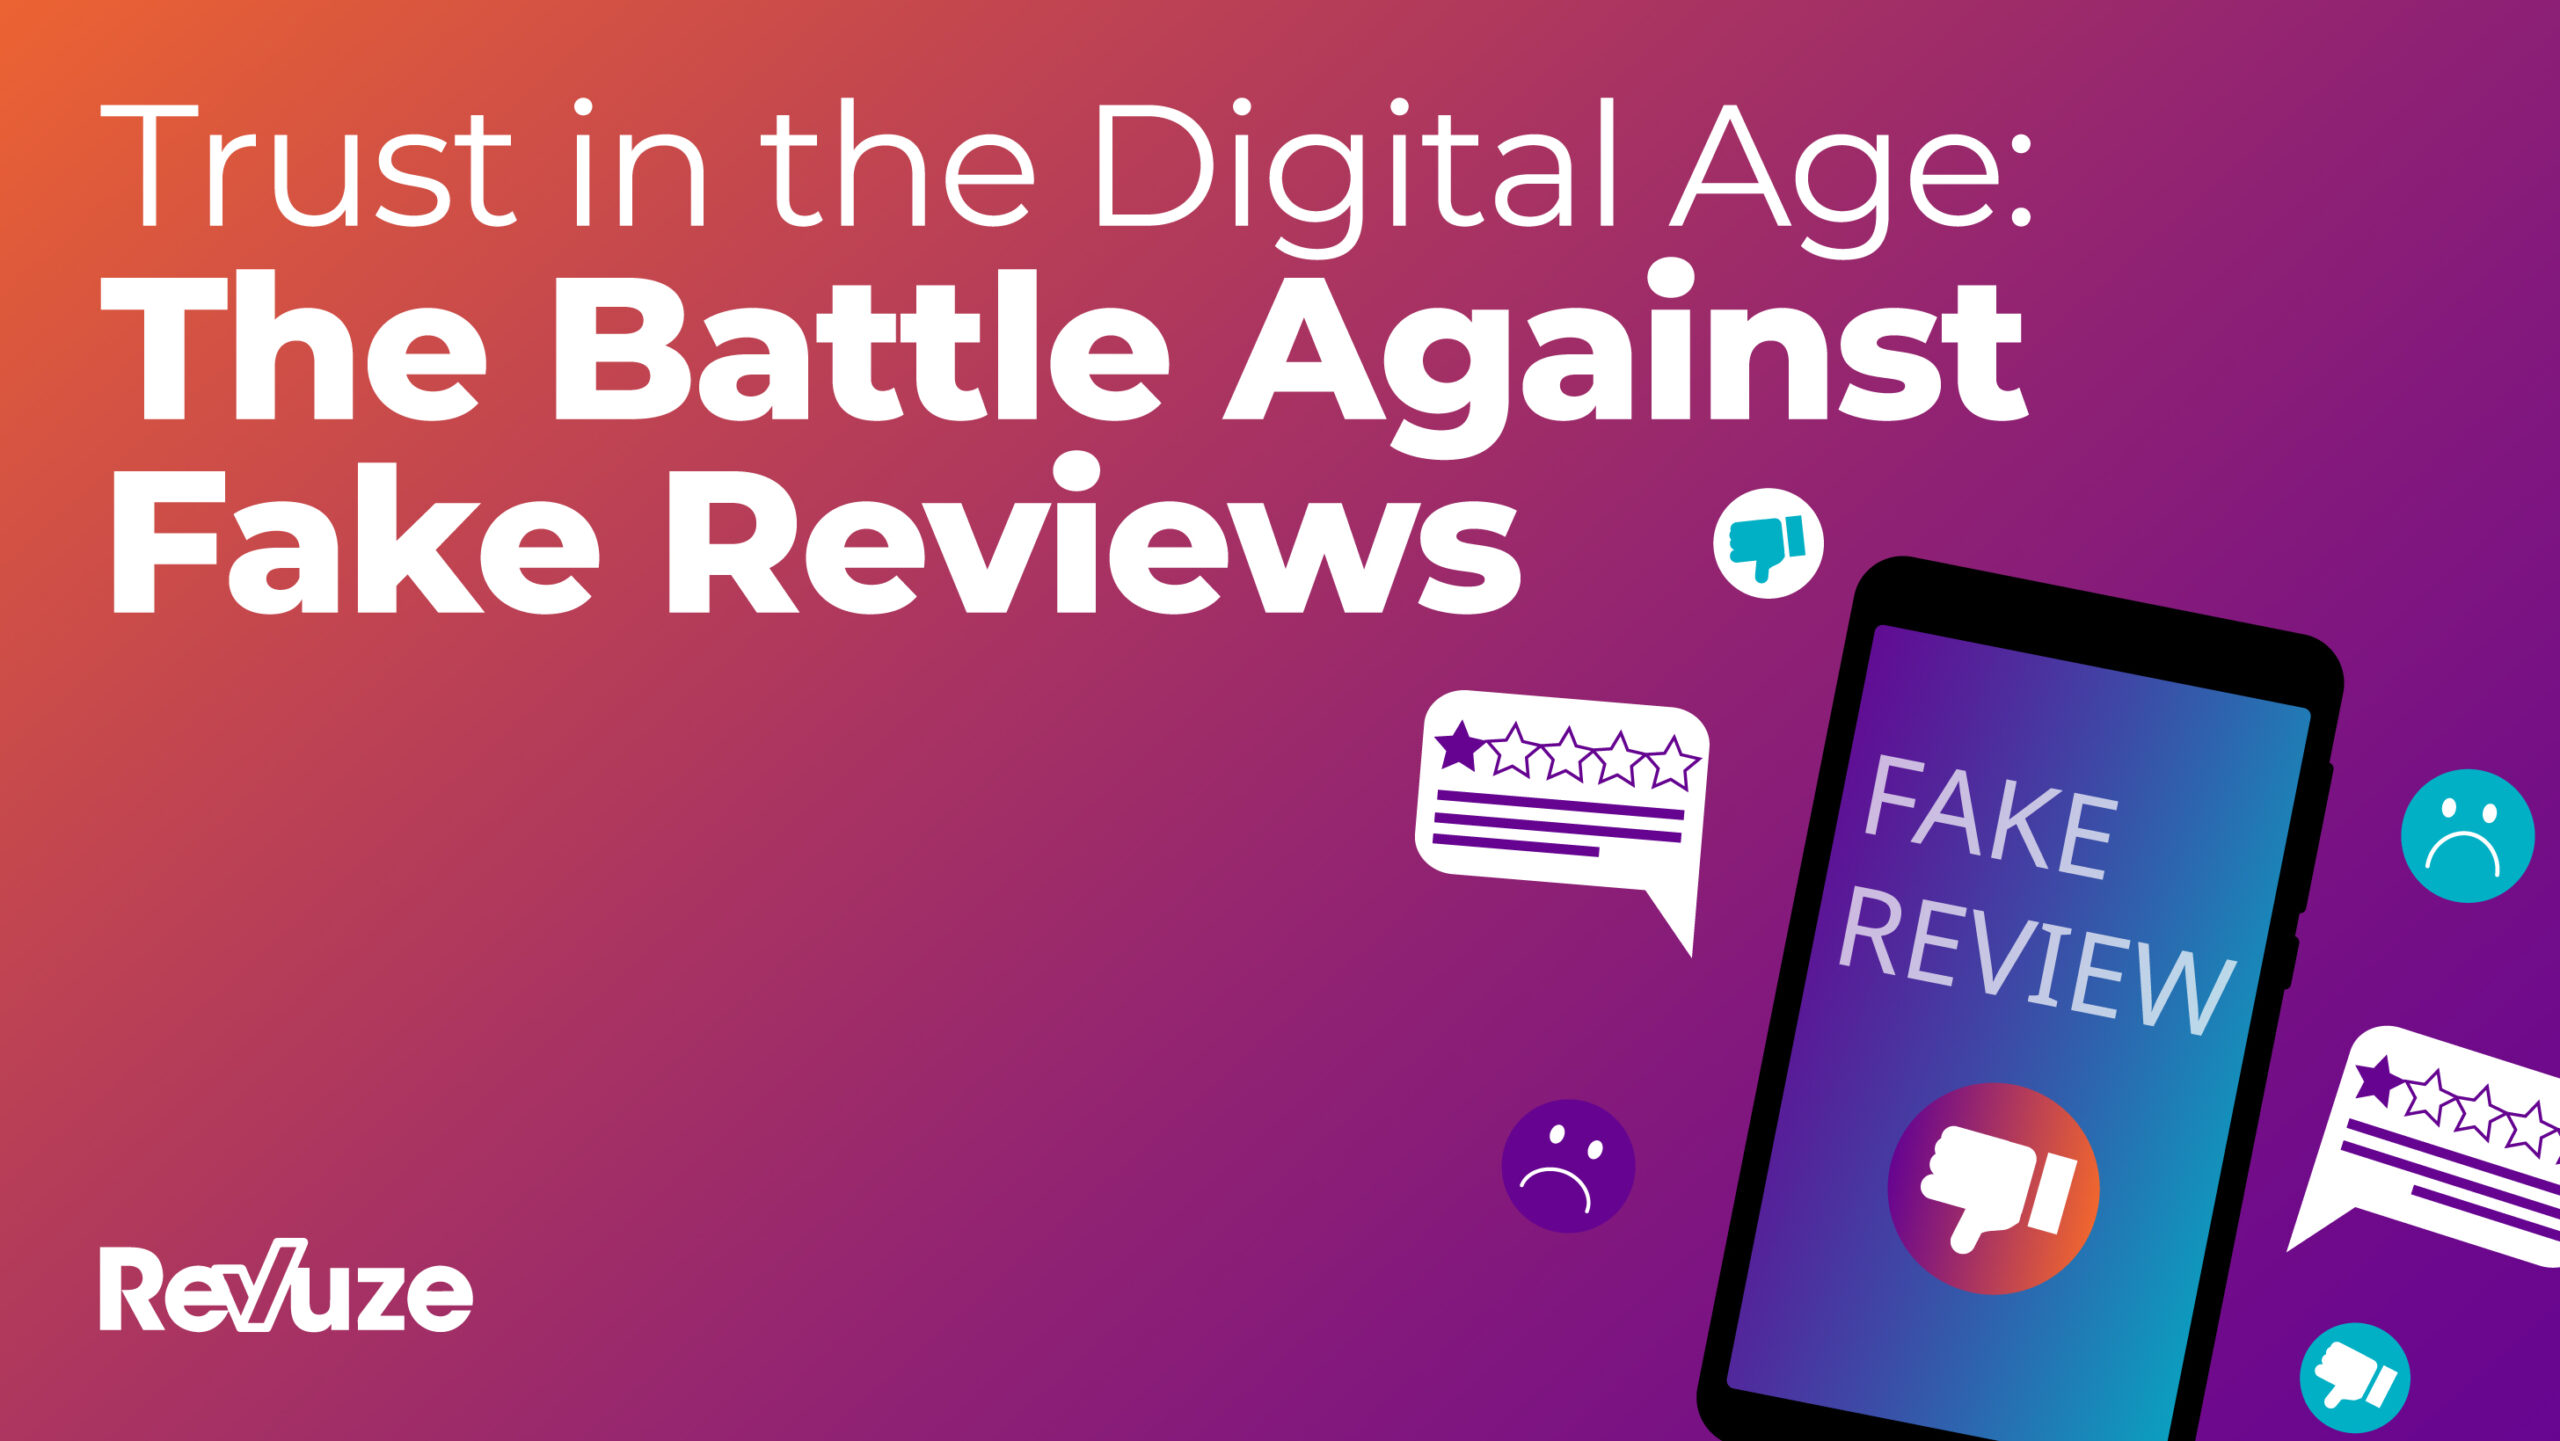 Trust in the Digital Age: The Battle Against Fake Reviews